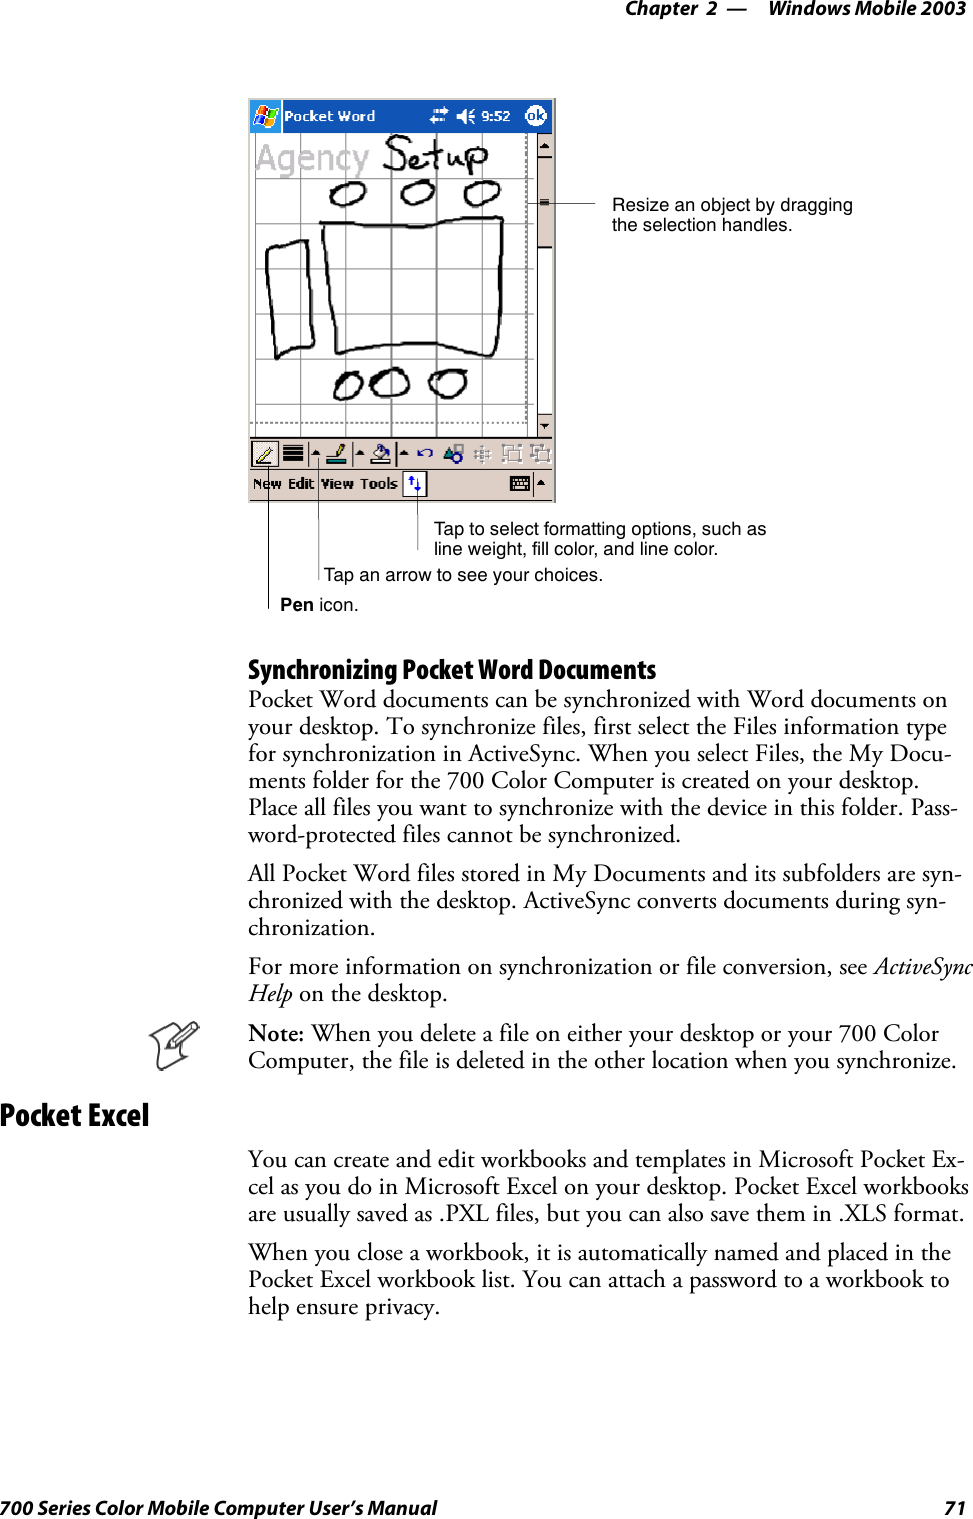 Windows Mobile 2003—Chapter 271700 Series Color Mobile Computer User’s ManualTap to select formatting options, such asline weight, fill color, and line color.Resize an object by draggingthe selection handles.Tap an arrow to see your choices.Pen icon.Synchronizing Pocket Word DocumentsPocket Word documents can be synchronized with Word documents onyour desktop. To synchronize files, first select the Files information typefor synchronization in ActiveSync. When you select Files, the My Docu-ments folder for the 700 Color Computer is created on your desktop.Place all files you want to synchronize with the device in this folder. Pass-word-protected files cannot be synchronized.All Pocket Word files stored in My Documents and its subfolders are syn-chronized with the desktop. ActiveSync converts documents during syn-chronization.For more information on synchronization or file conversion, see ActiveSyncHelp on the desktop.Note: When you delete a file on either your desktop or your 700 ColorComputer, the file is deleted in the other location when you synchronize.Pocket ExcelYou can create and edit workbooks and templates in Microsoft Pocket Ex-cel as you do in Microsoft Excel on your desktop. Pocket Excel workbooksare usually saved as .PXL files, but you can also save them in .XLS format.When you close a workbook, it is automatically named and placed in thePocket Excel workbook list. You can attach a password to a workbook tohelp ensure privacy.